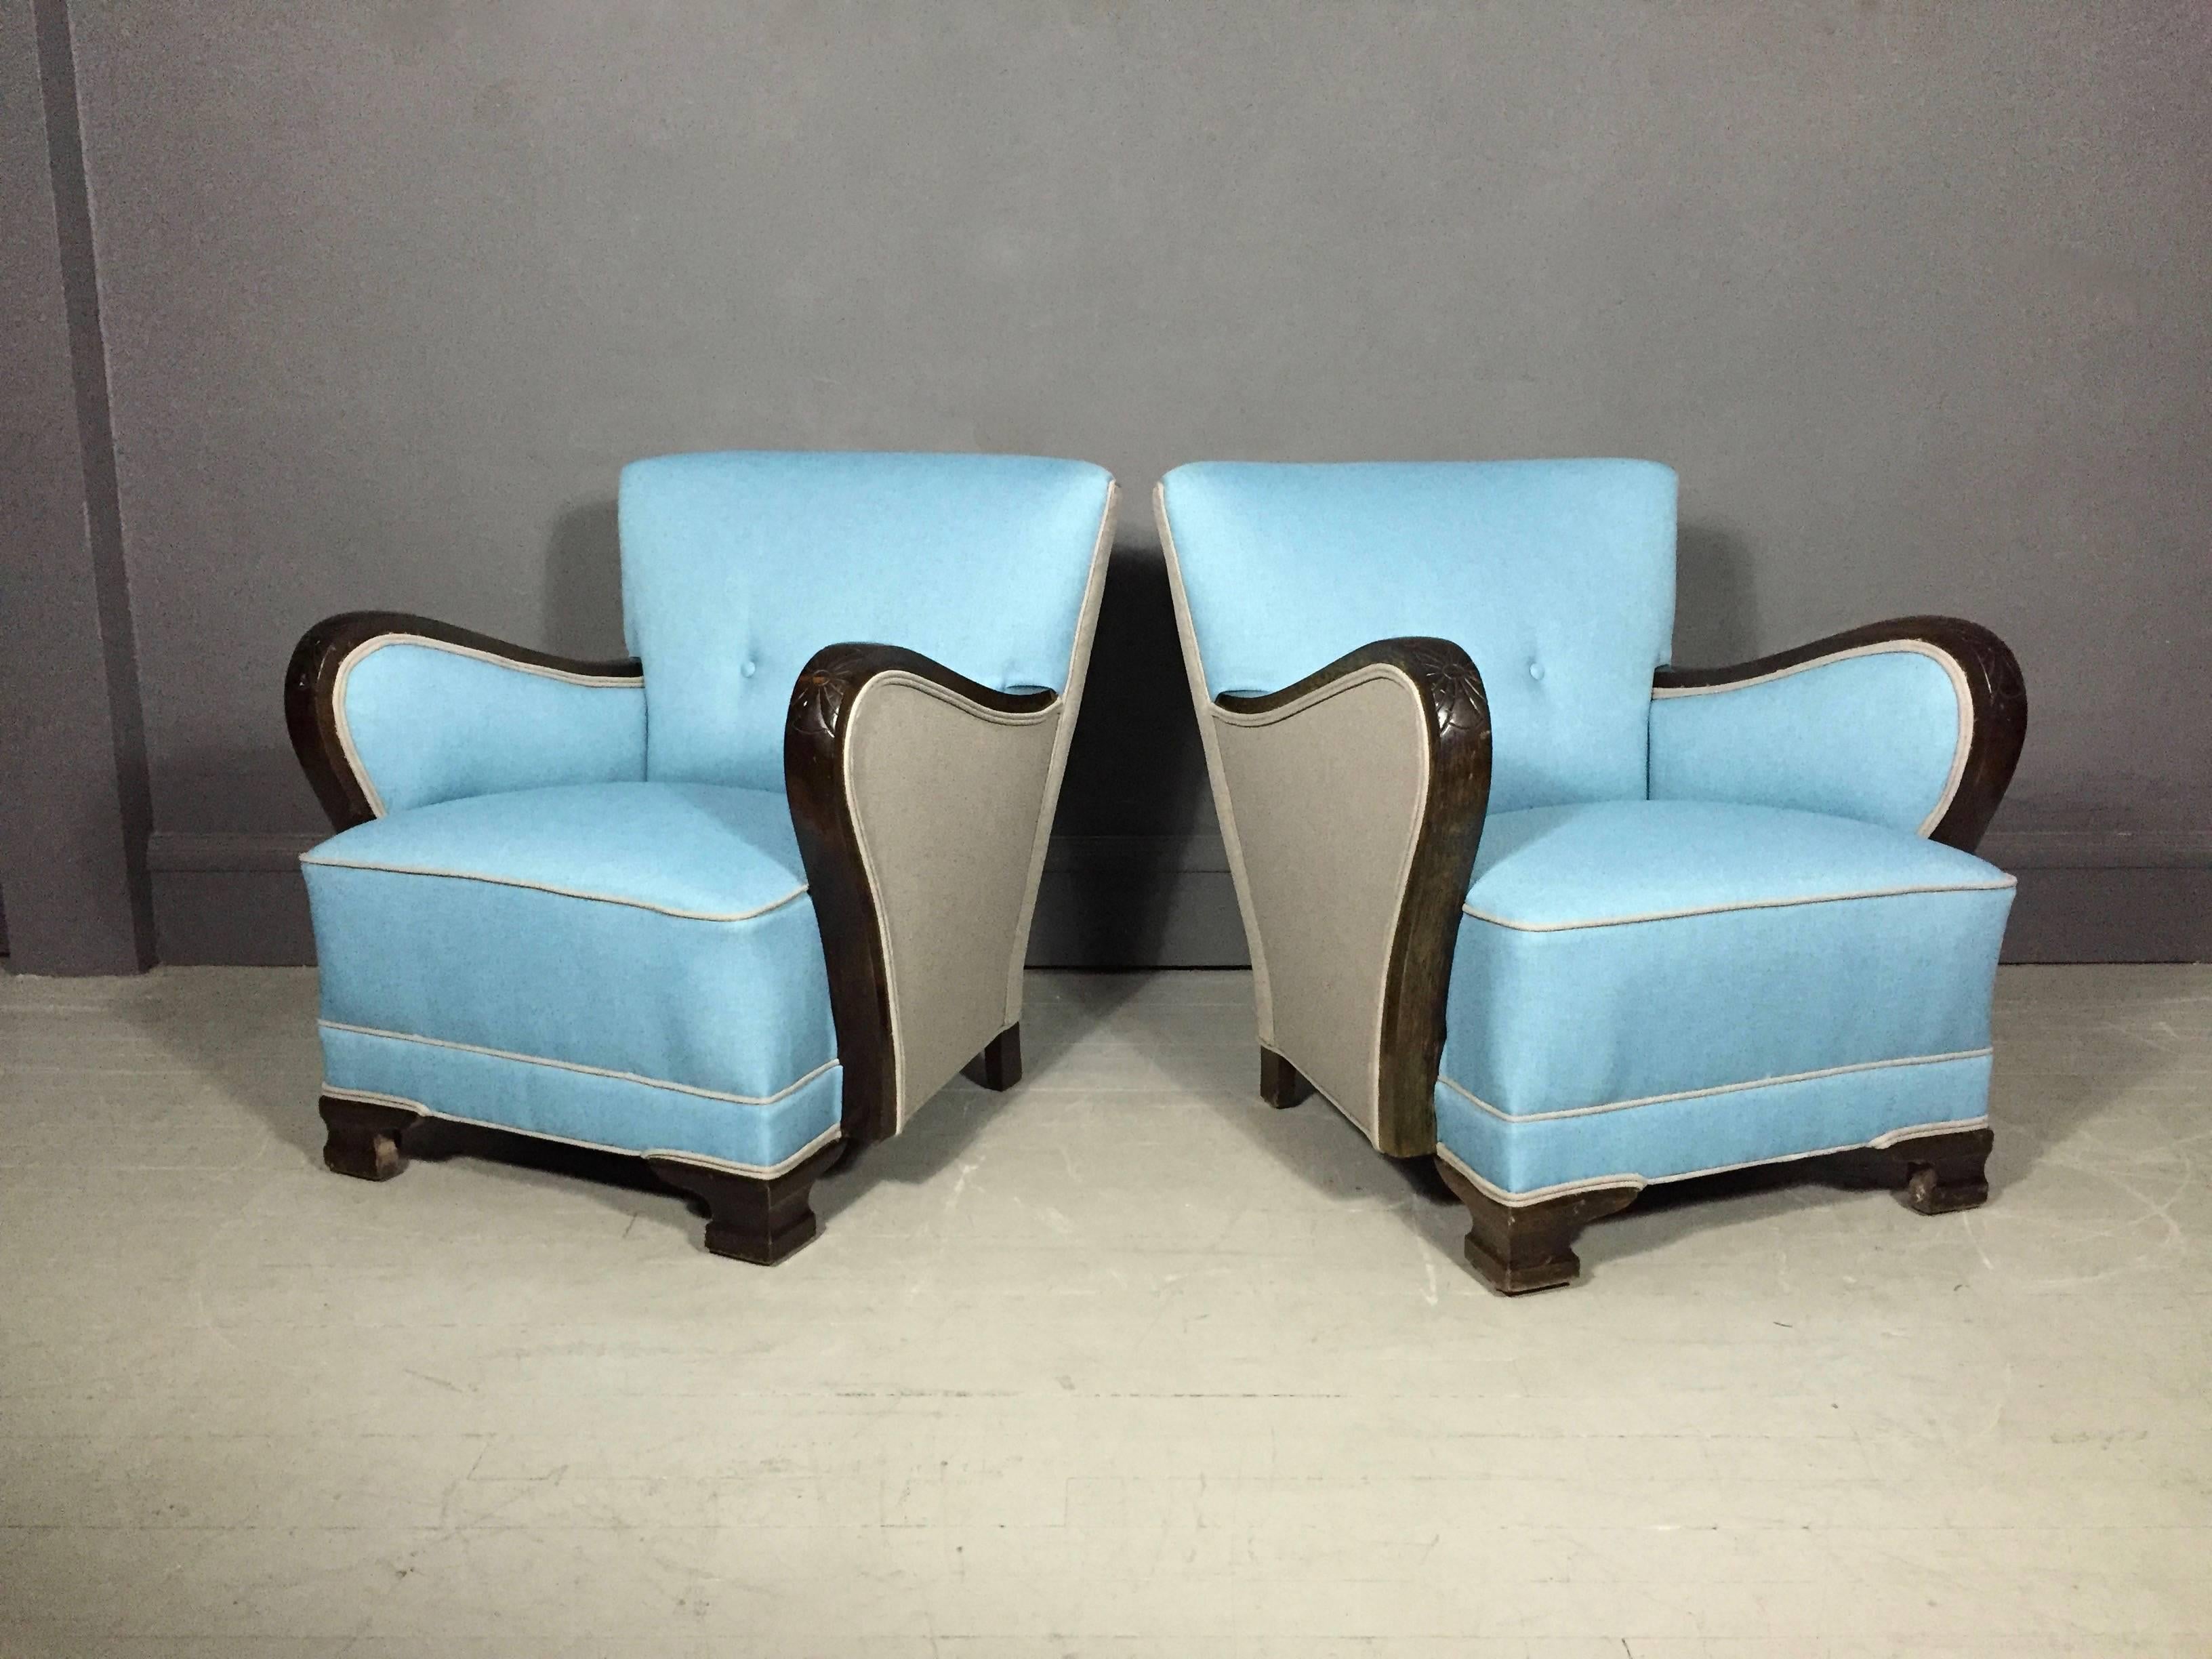 Wonderful profile for these early 1930s club chairs, with hand-carved and decorated mahogany arms. Recently updated with a gorgeous Maharam two-tone fabric and contrasting piping. Possibly Danish.